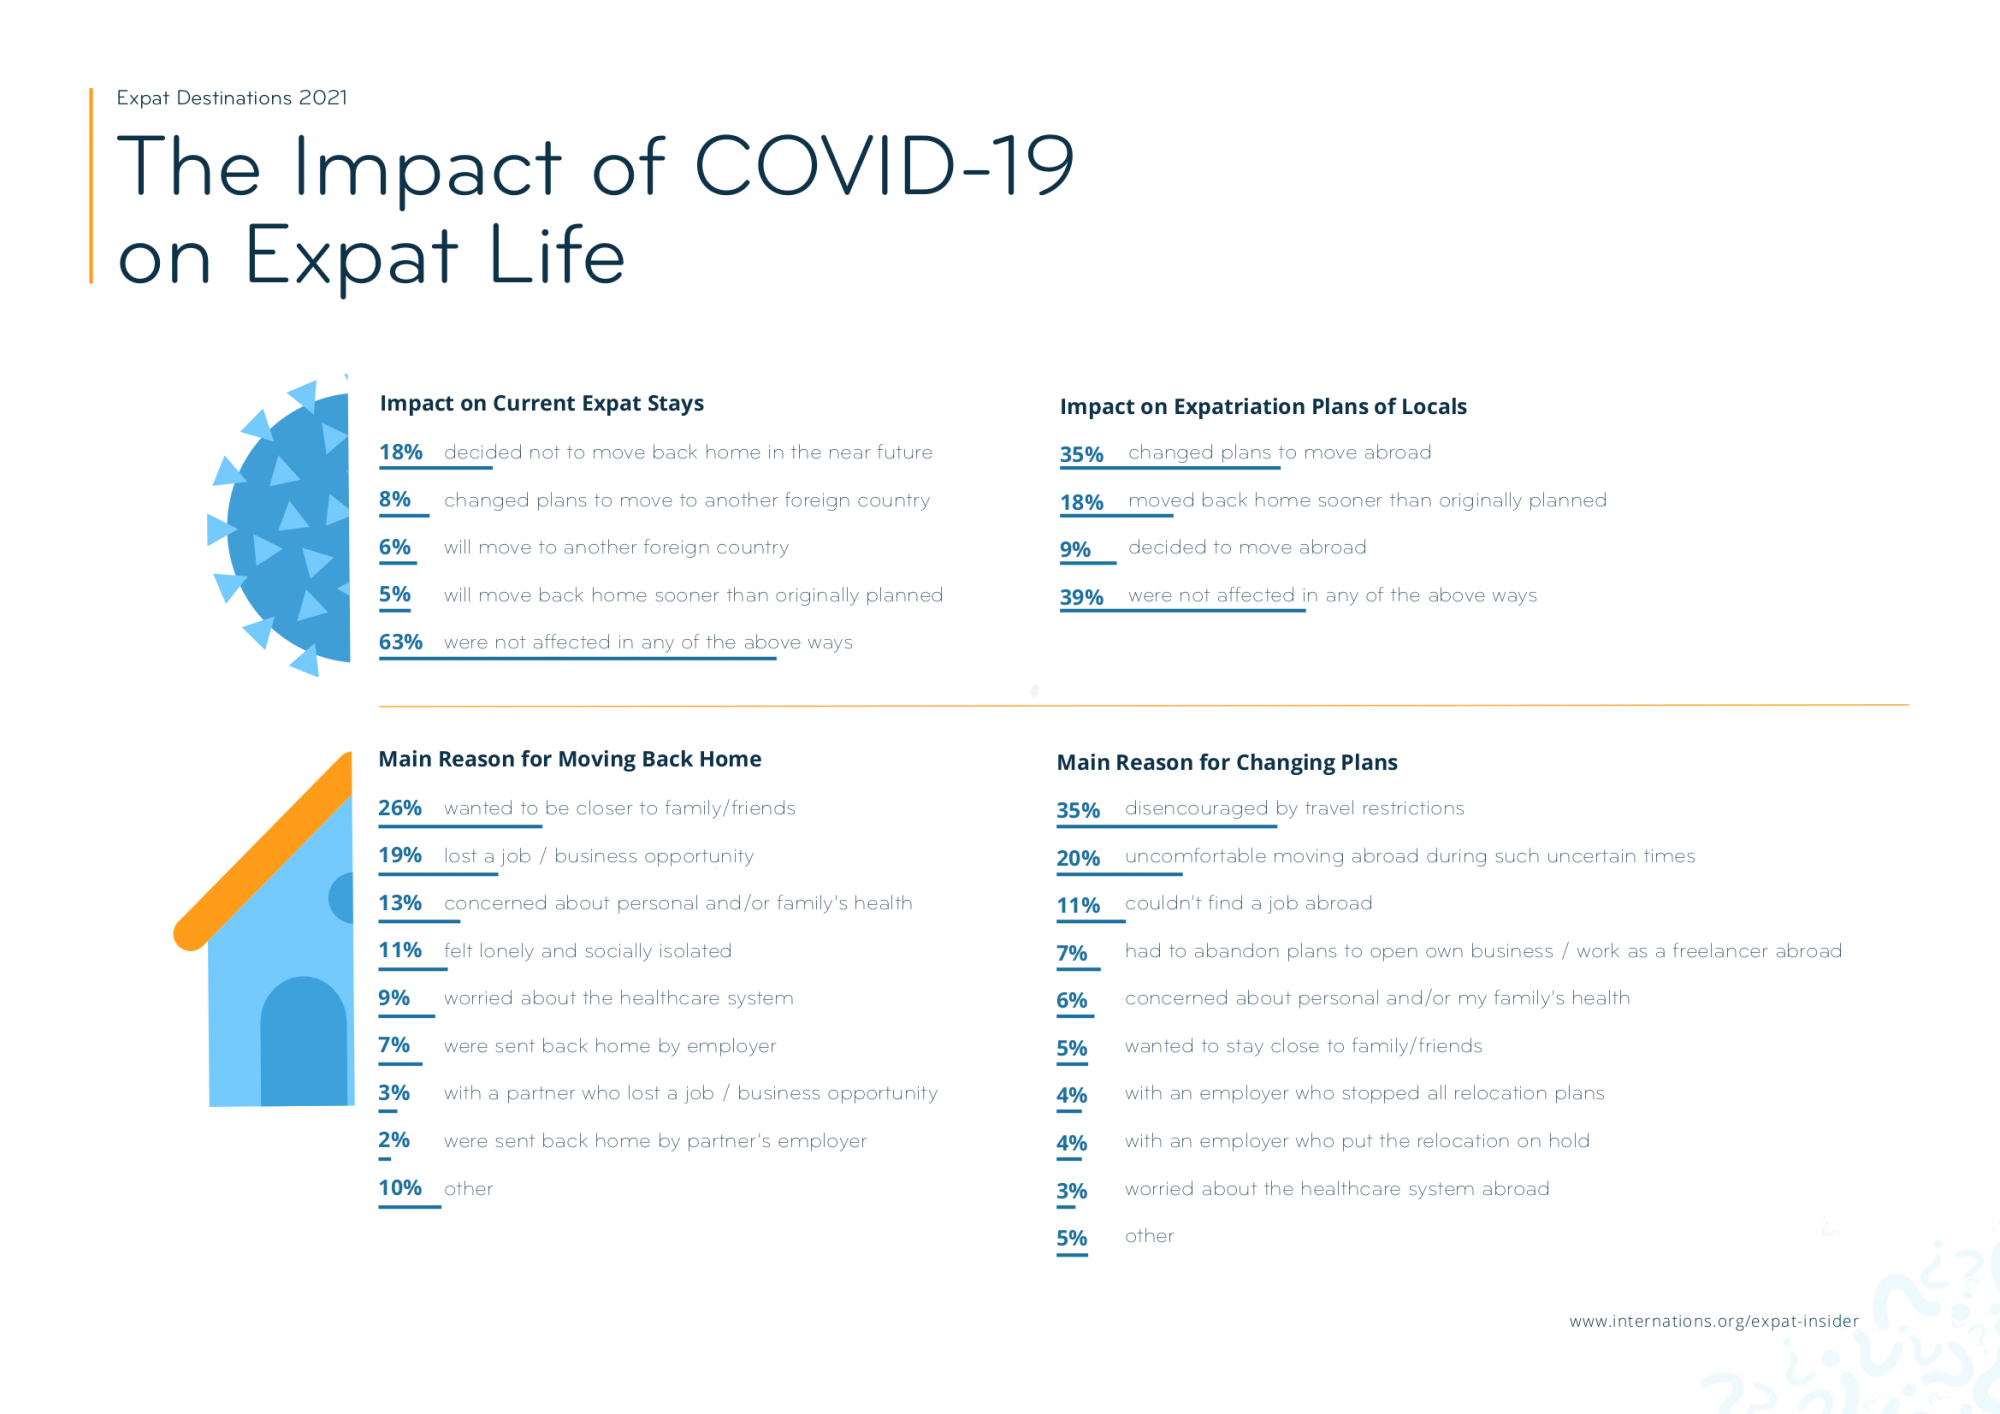 Impact of COVID-19 on expat life 2021